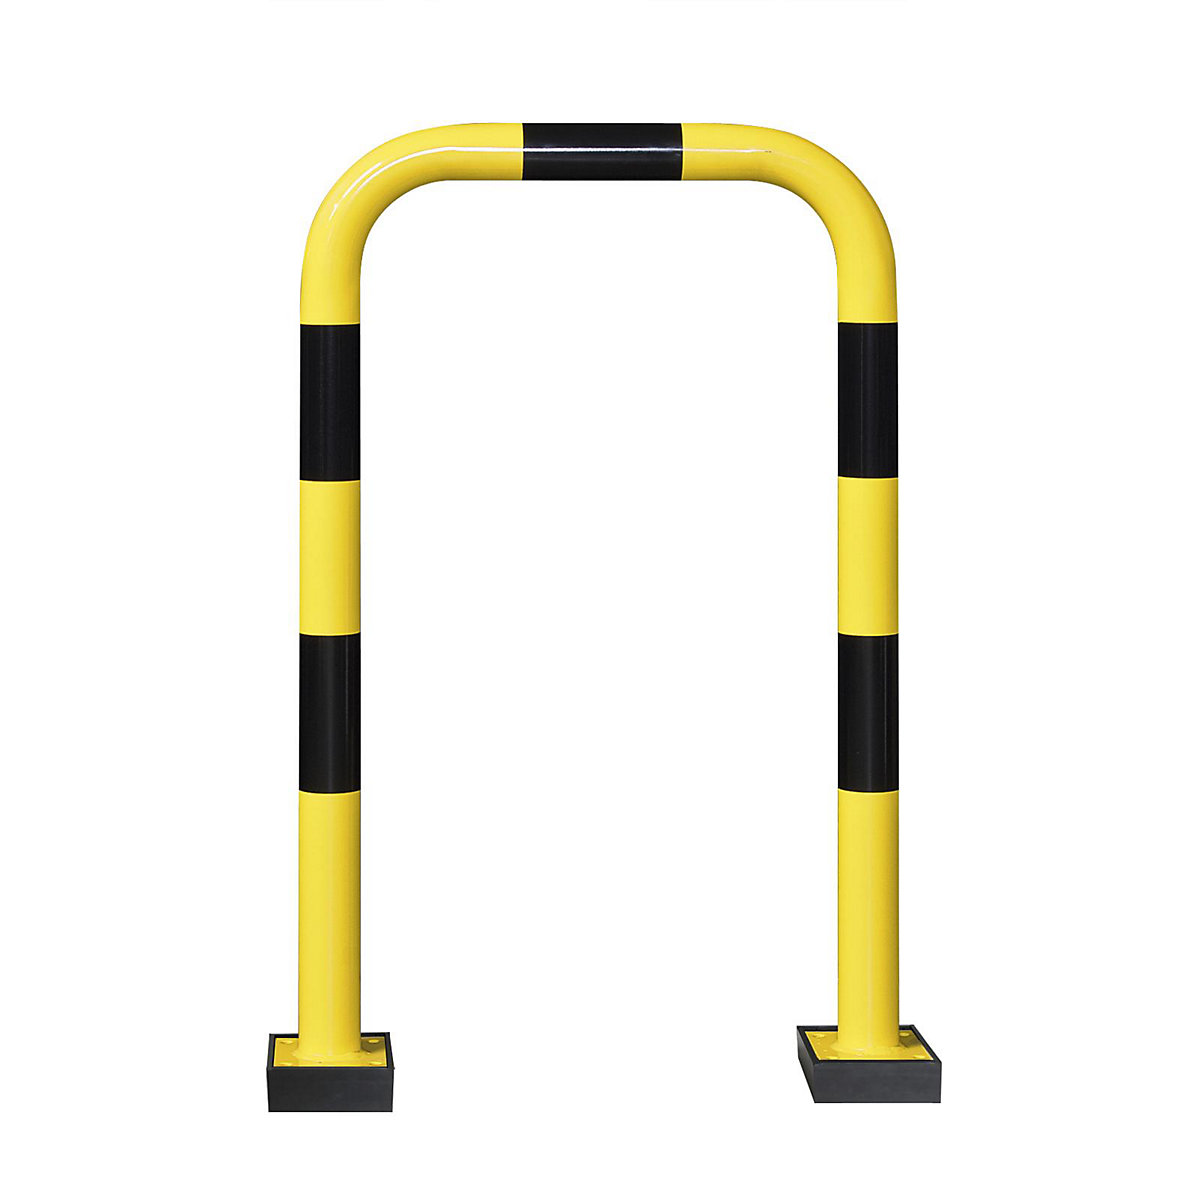 Crash protection bar, flexible, for indoor use, HxW 1240 x 750 mm